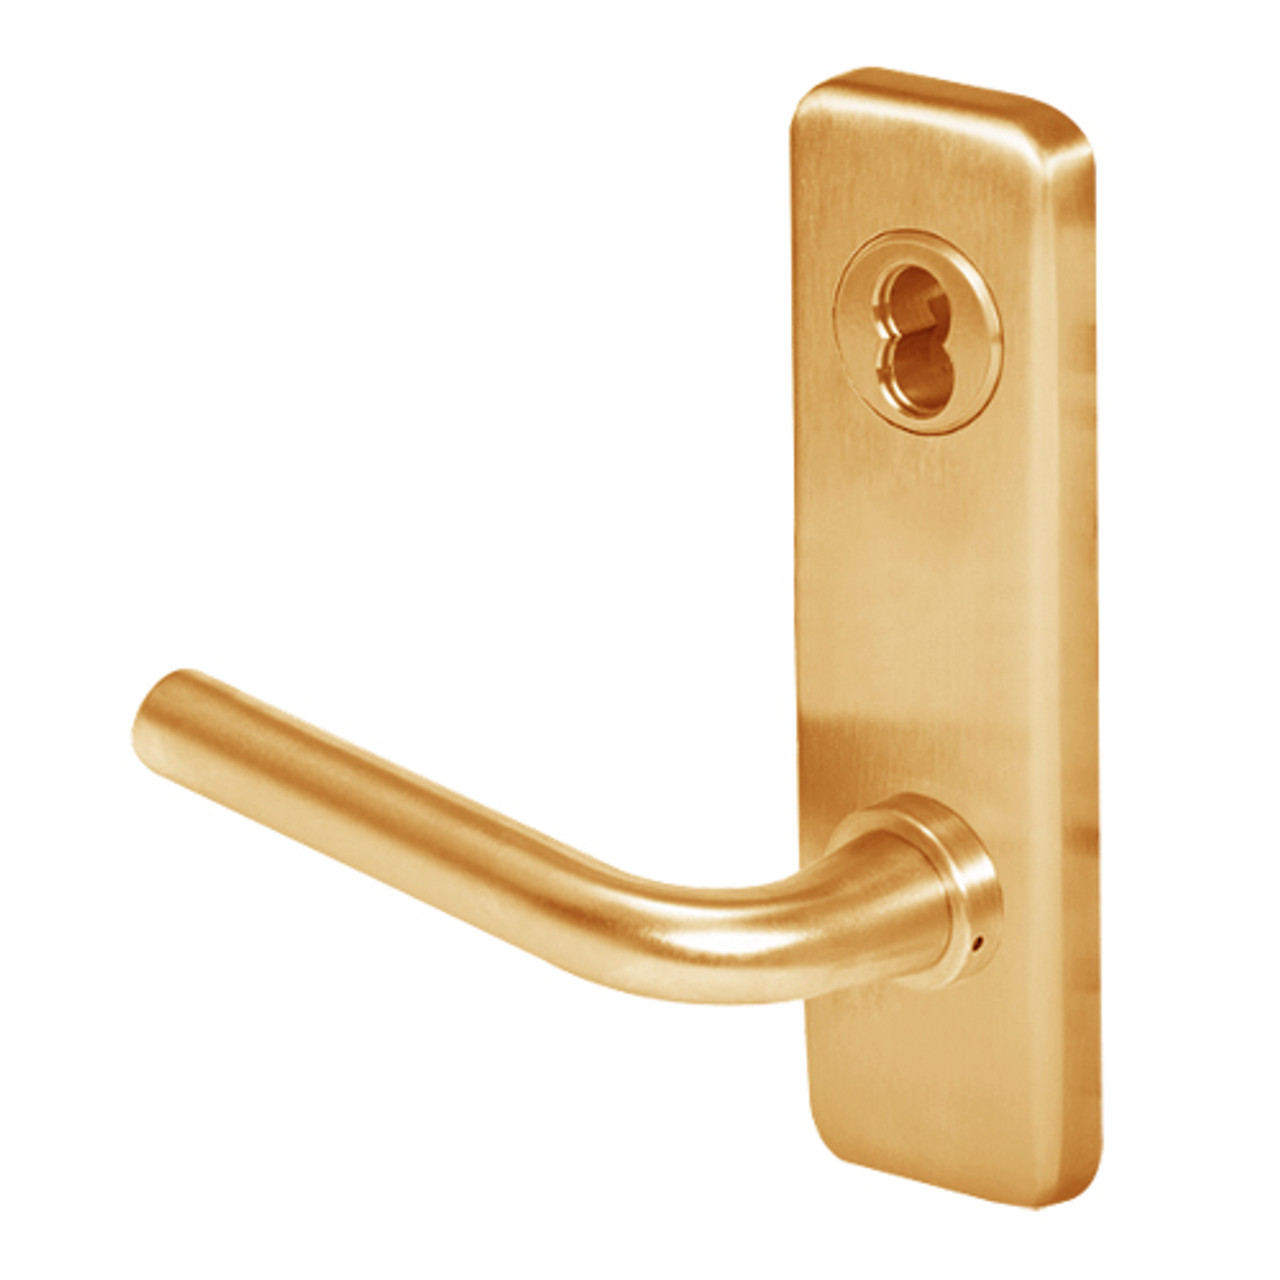 45H0L12J612 Best 40H Series Privacy with Deadbolt Heavy Duty Mortise Lever Lock with Solid Tube with No Return in Satin Bronze